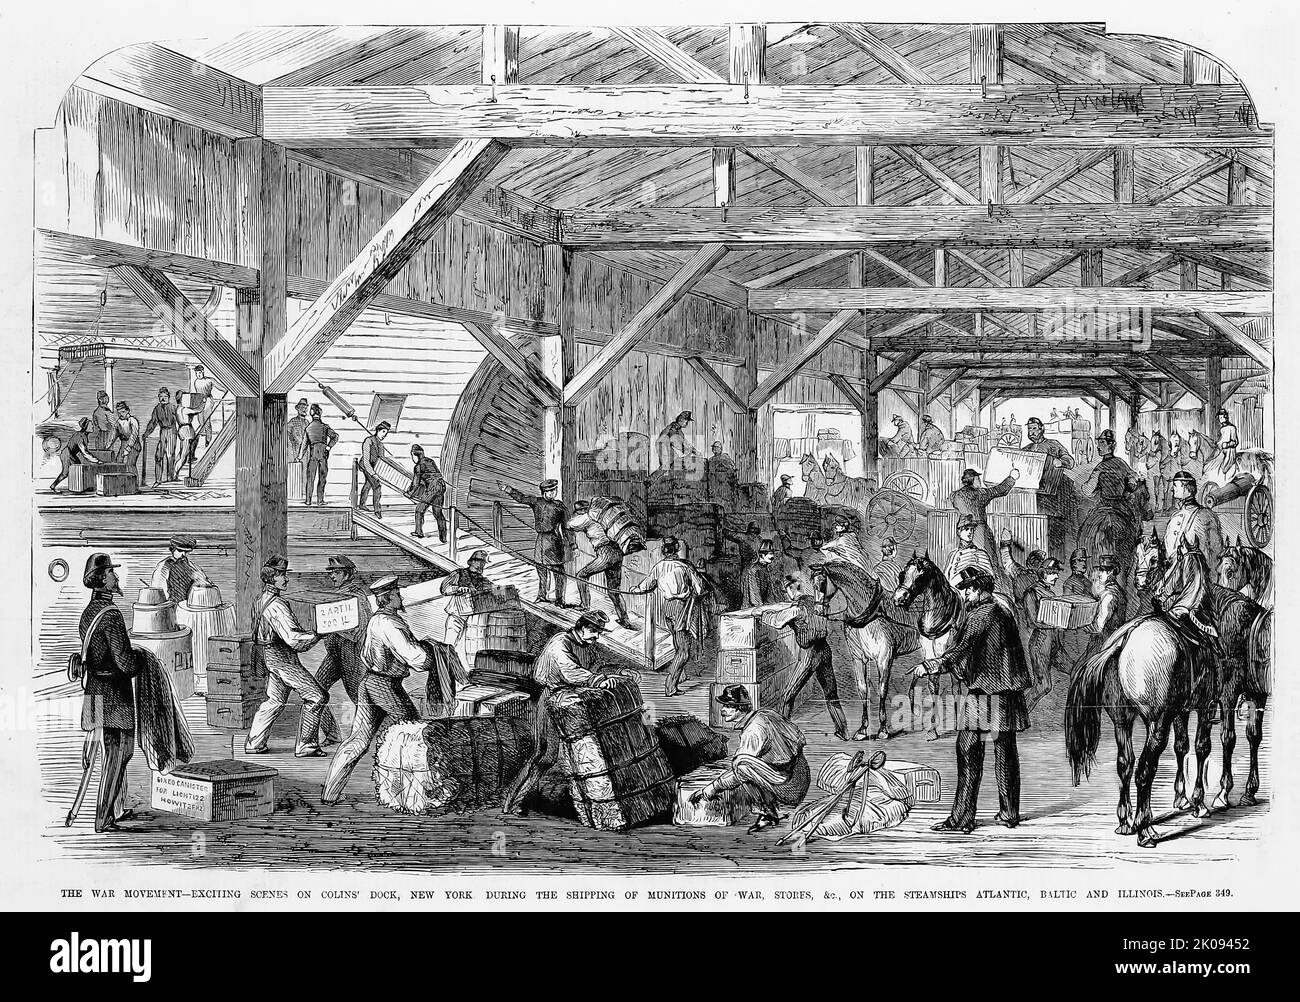 The war movement - Exciting scenes on Collins' dock, New York, during the shipping of munitions of war, stores, etc., on the steamships Atlantic, Baltic and Illinois, April 6th, 1861. 19th century American Civil War illustration from Frank Leslie's Illustrated Newspaper Stock Photo